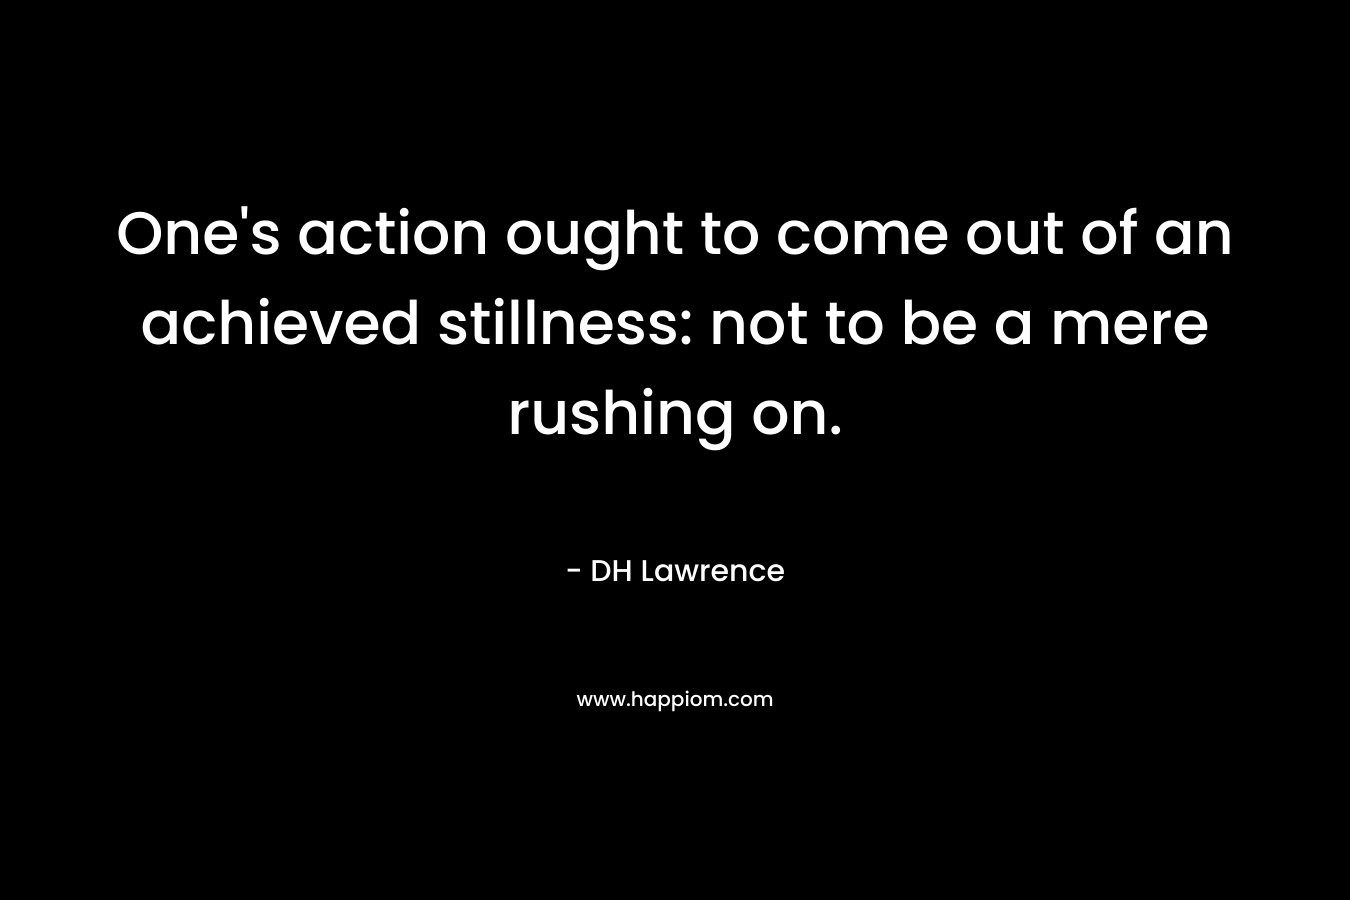 One’s action ought to come out of an achieved stillness: not to be a mere rushing on. – DH Lawrence